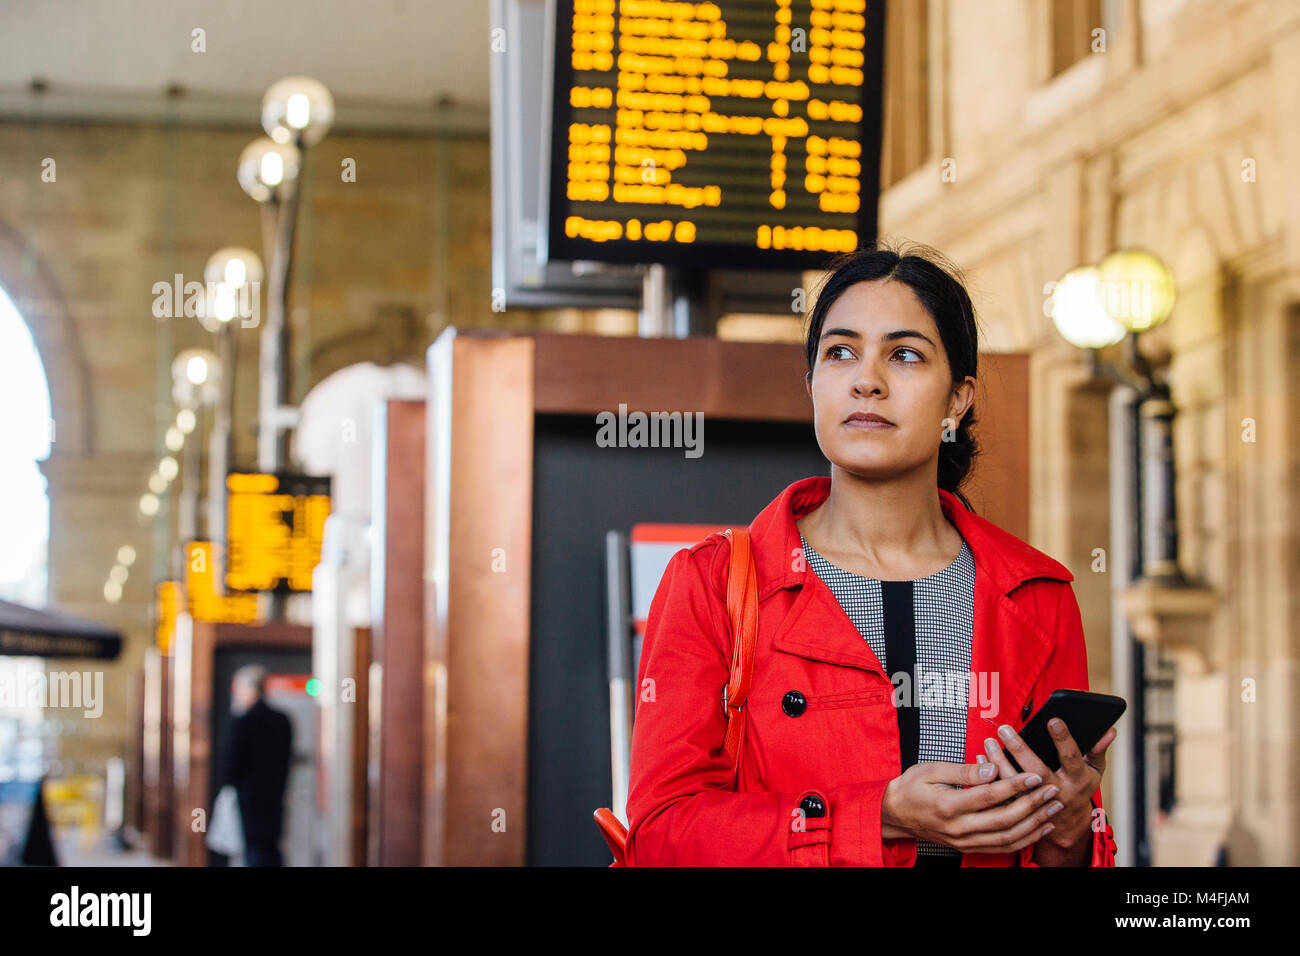 Businesswoman is using her smart phone to find her train time using the departure board. Stock Photo